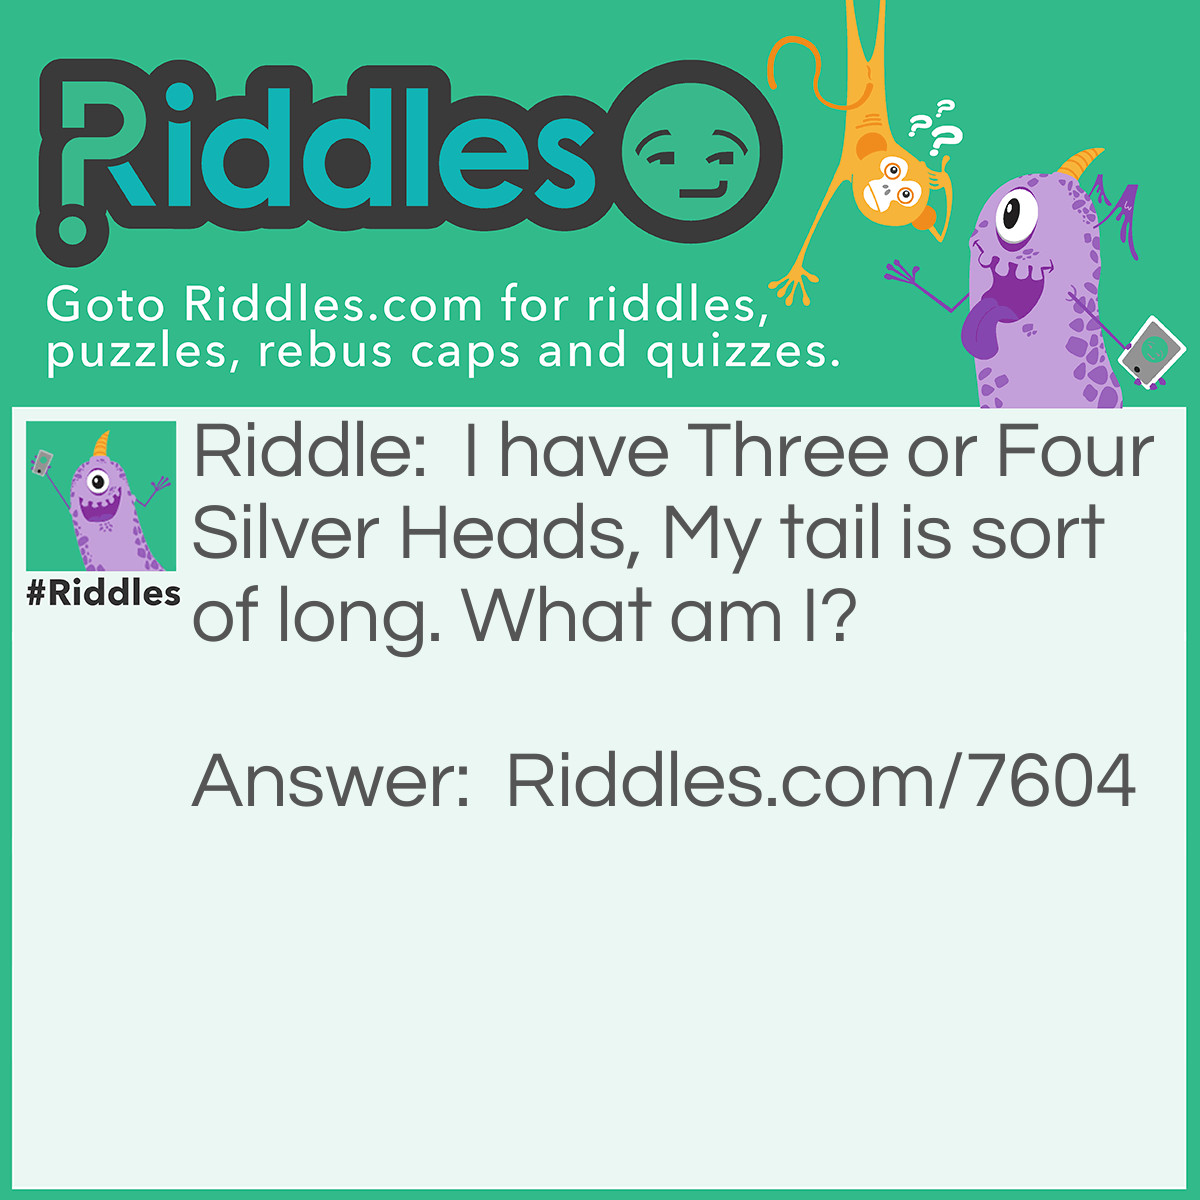 Riddle: I have Three or Four Silver Heads, My tail is sort of long. What am I? Answer: A Fork! (Three or Four Prongs; The handle is the Tail)